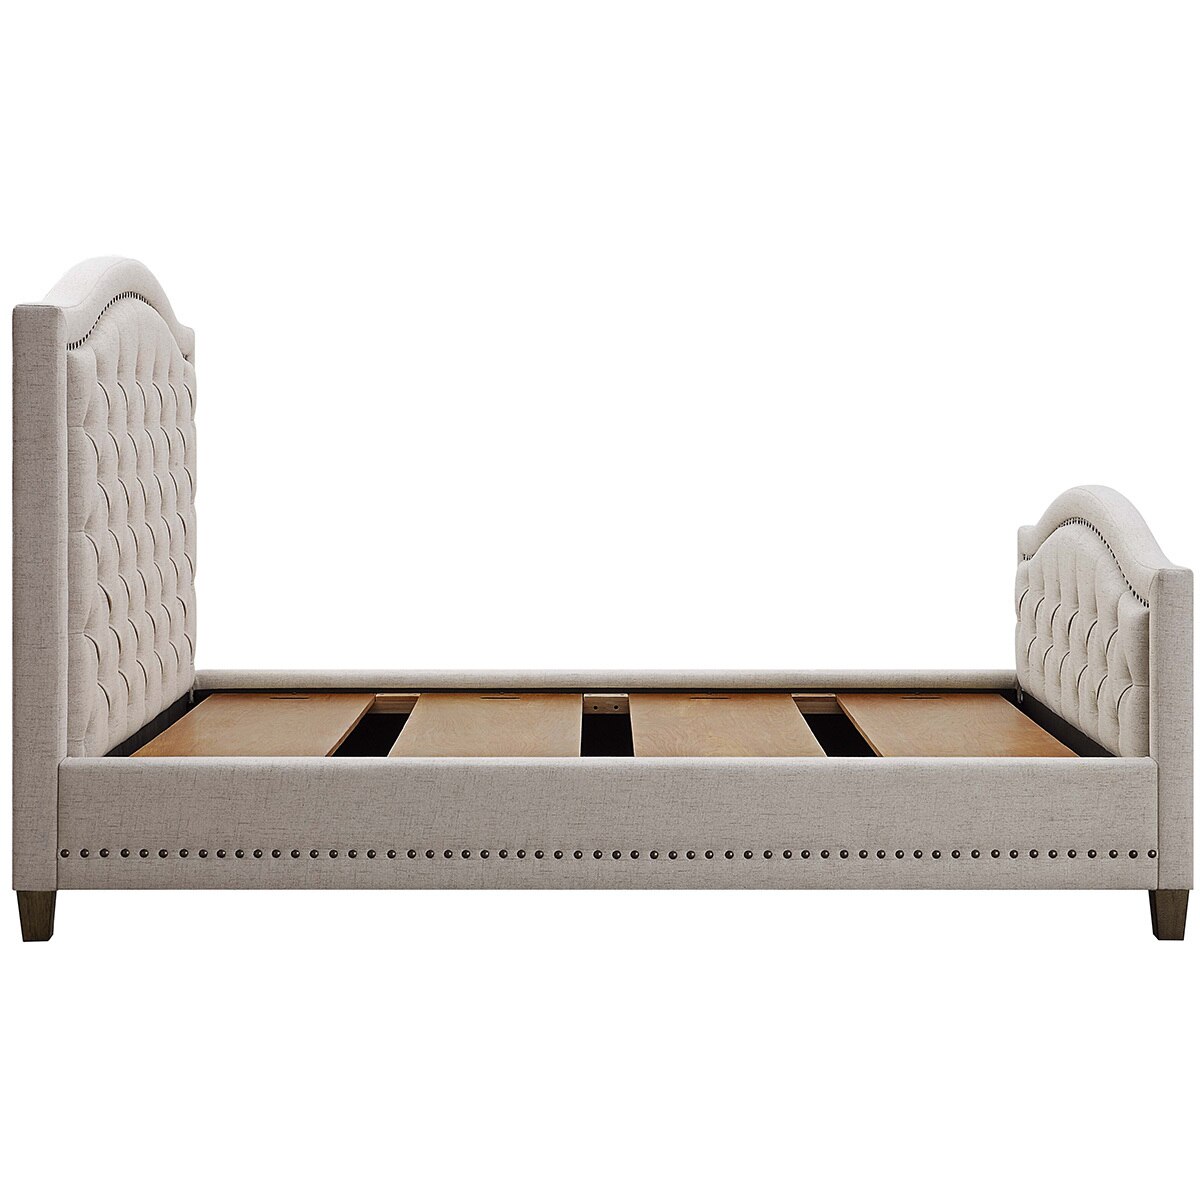 Thomasville Upholstered Queen Bed